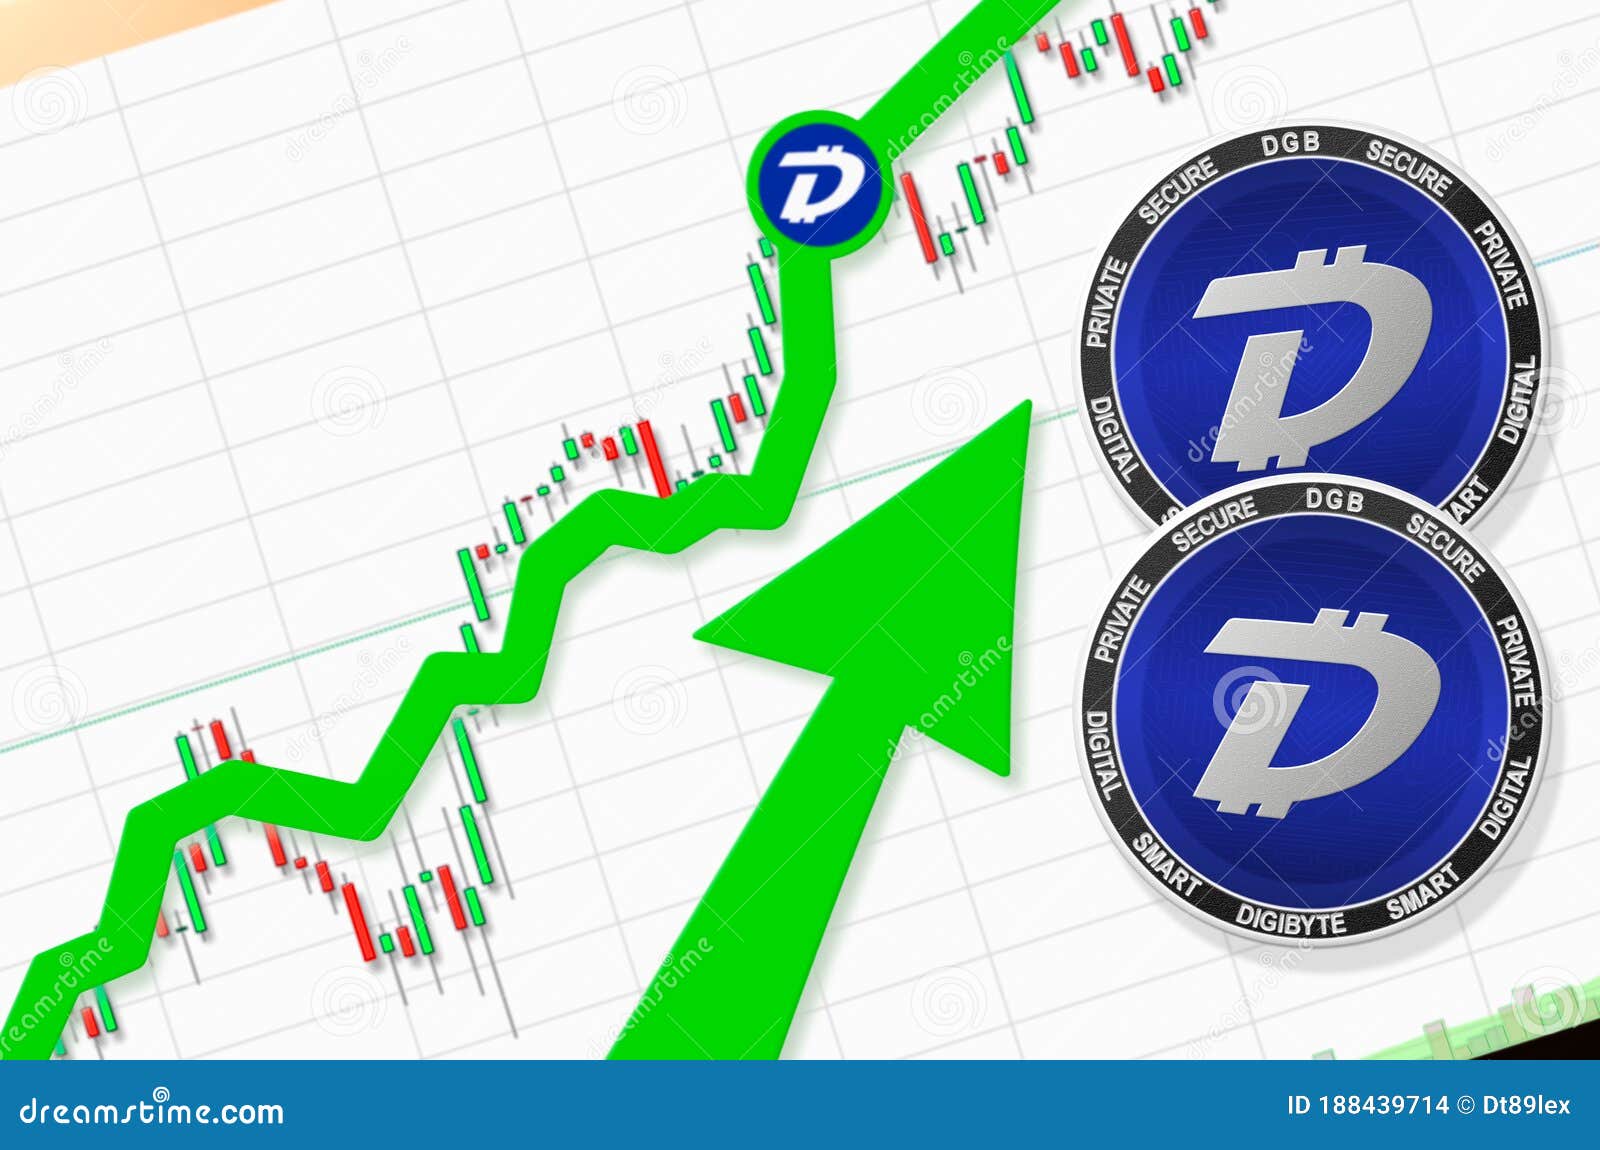 dgb cryptocurrency